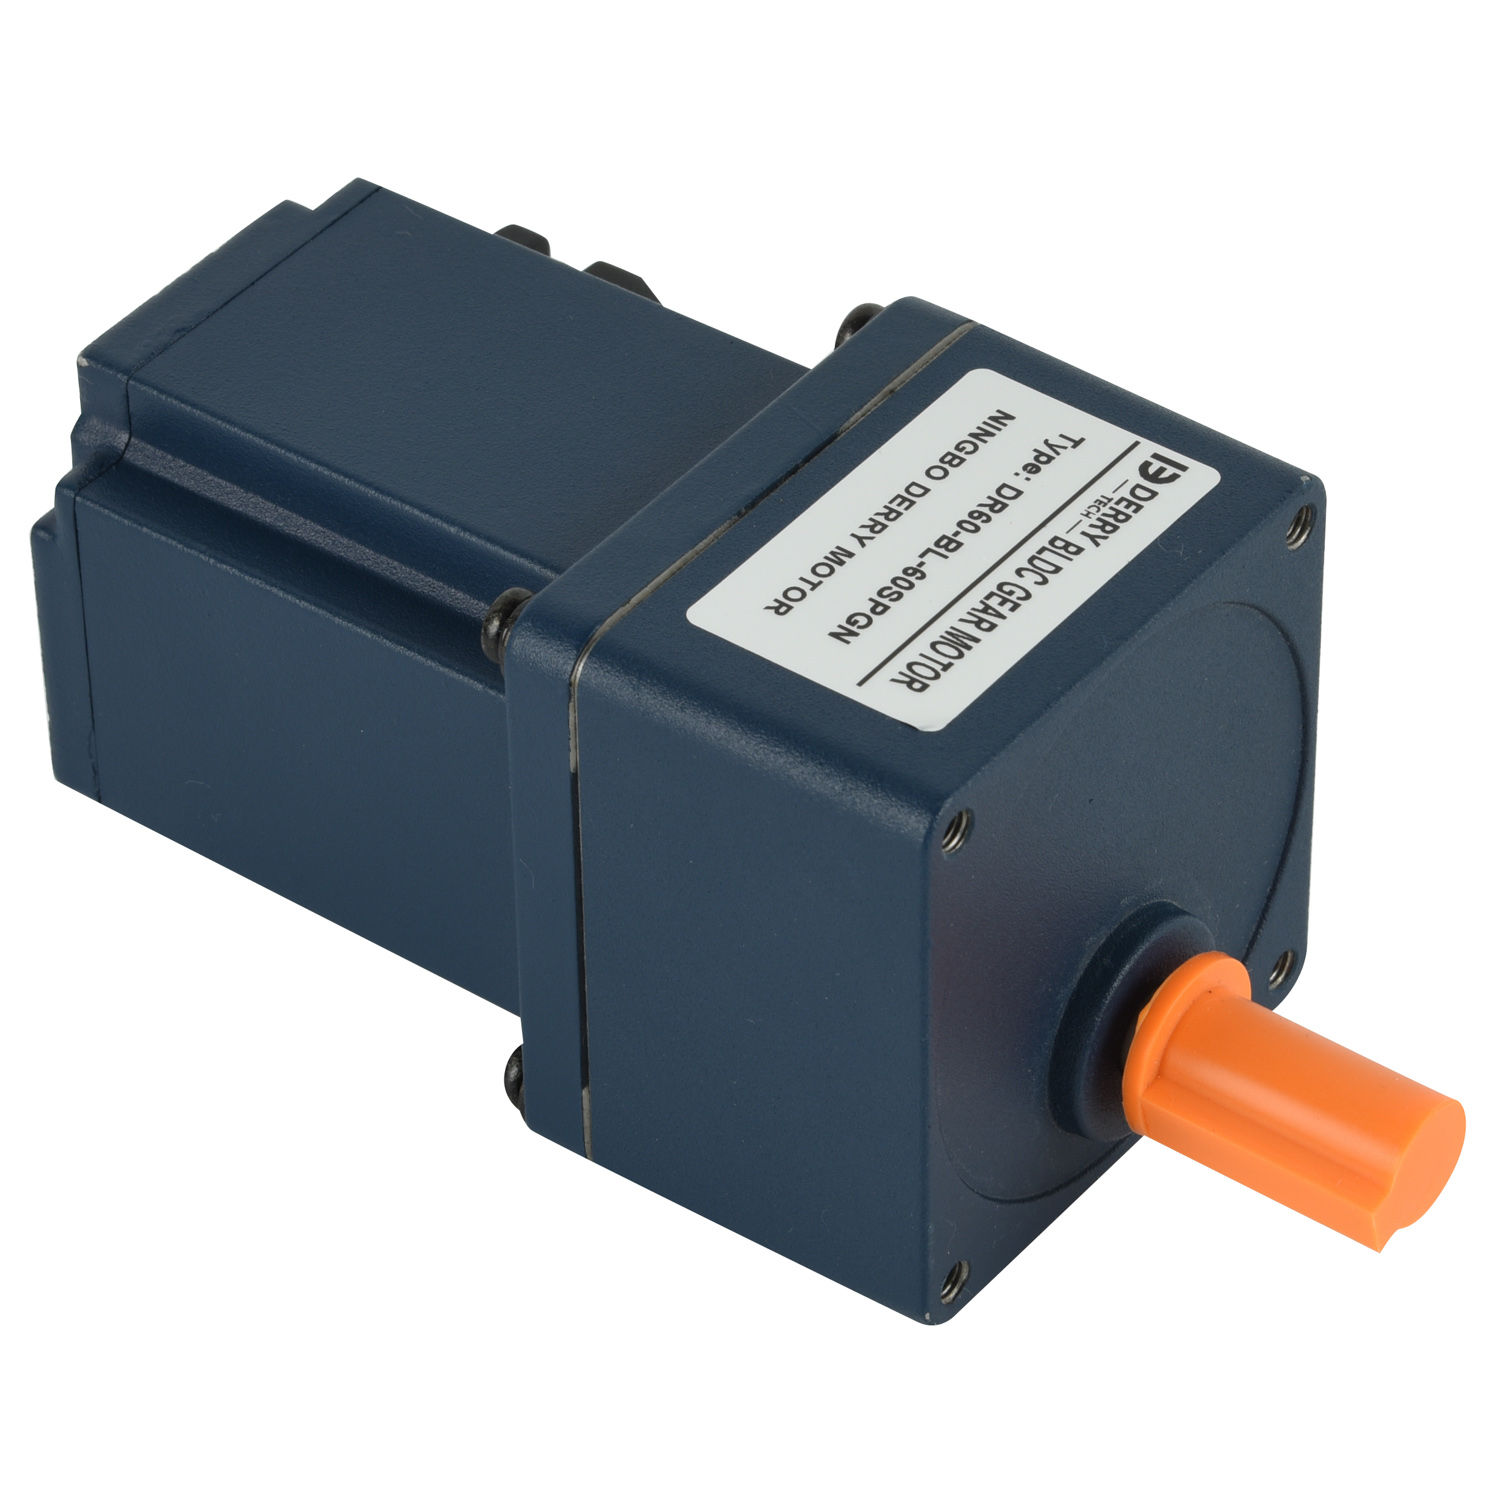 Brushless DC Gear Motor with solid output shaft